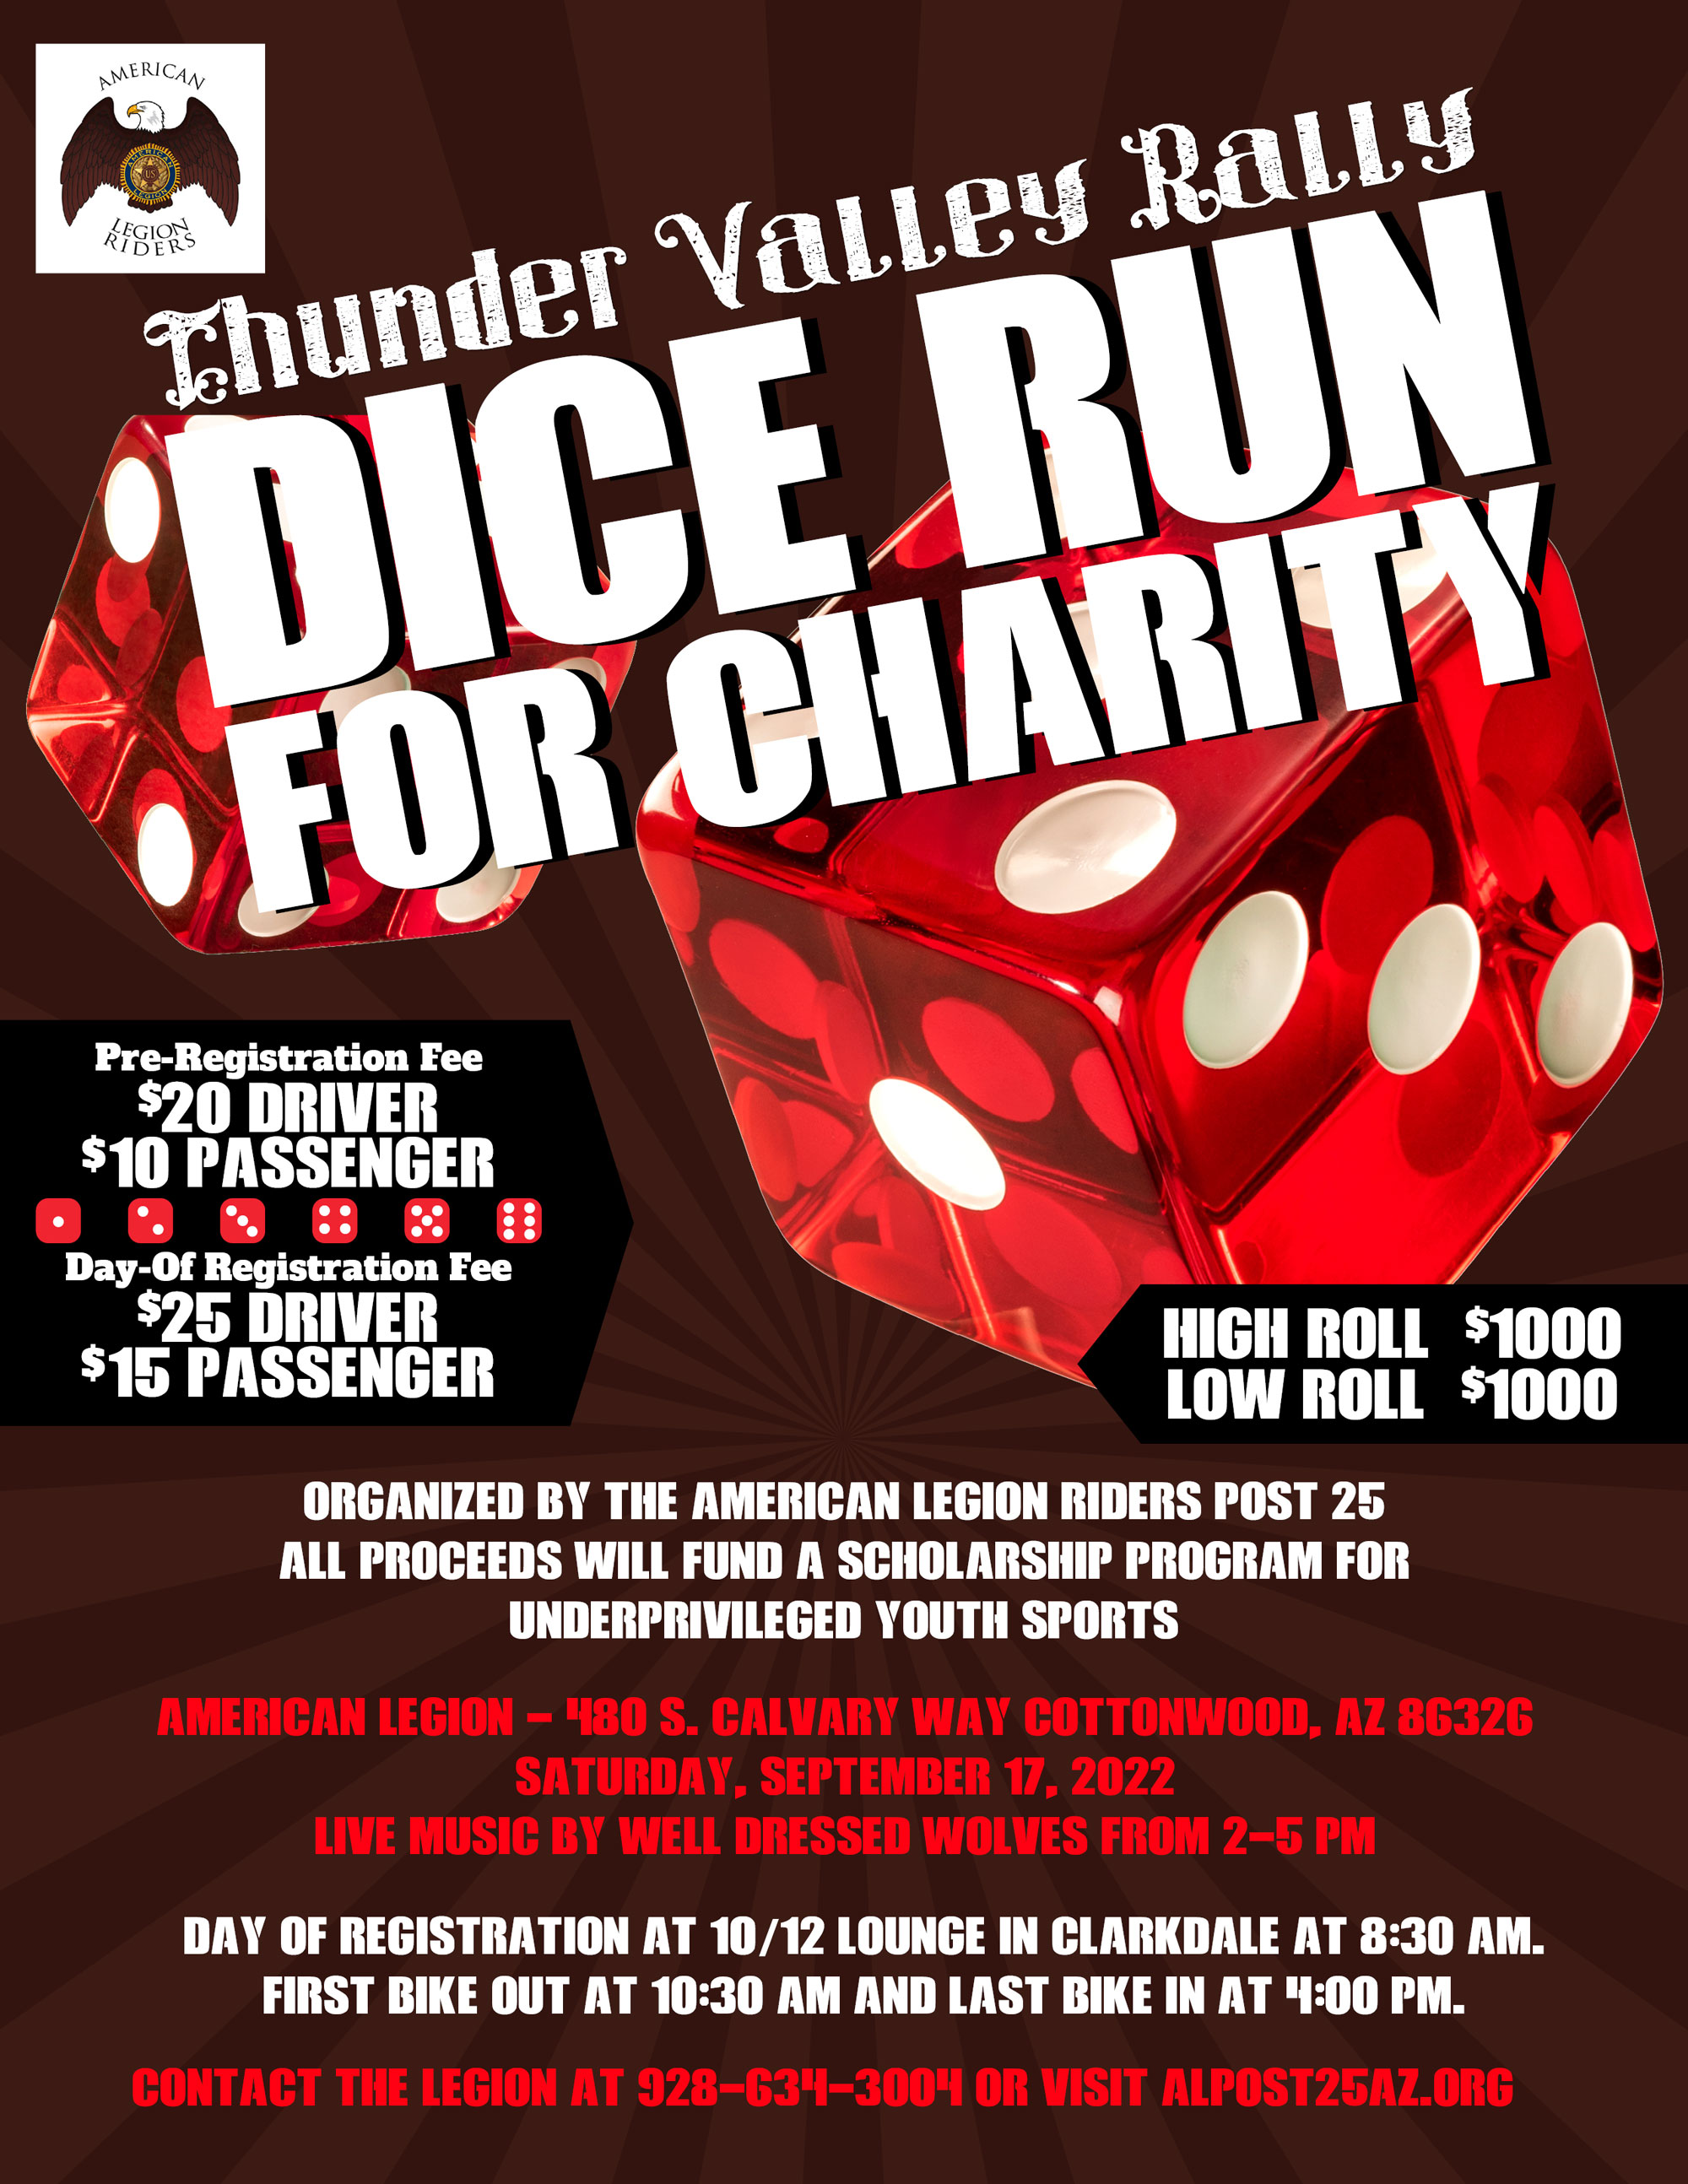 TVR Dice Run for Charity